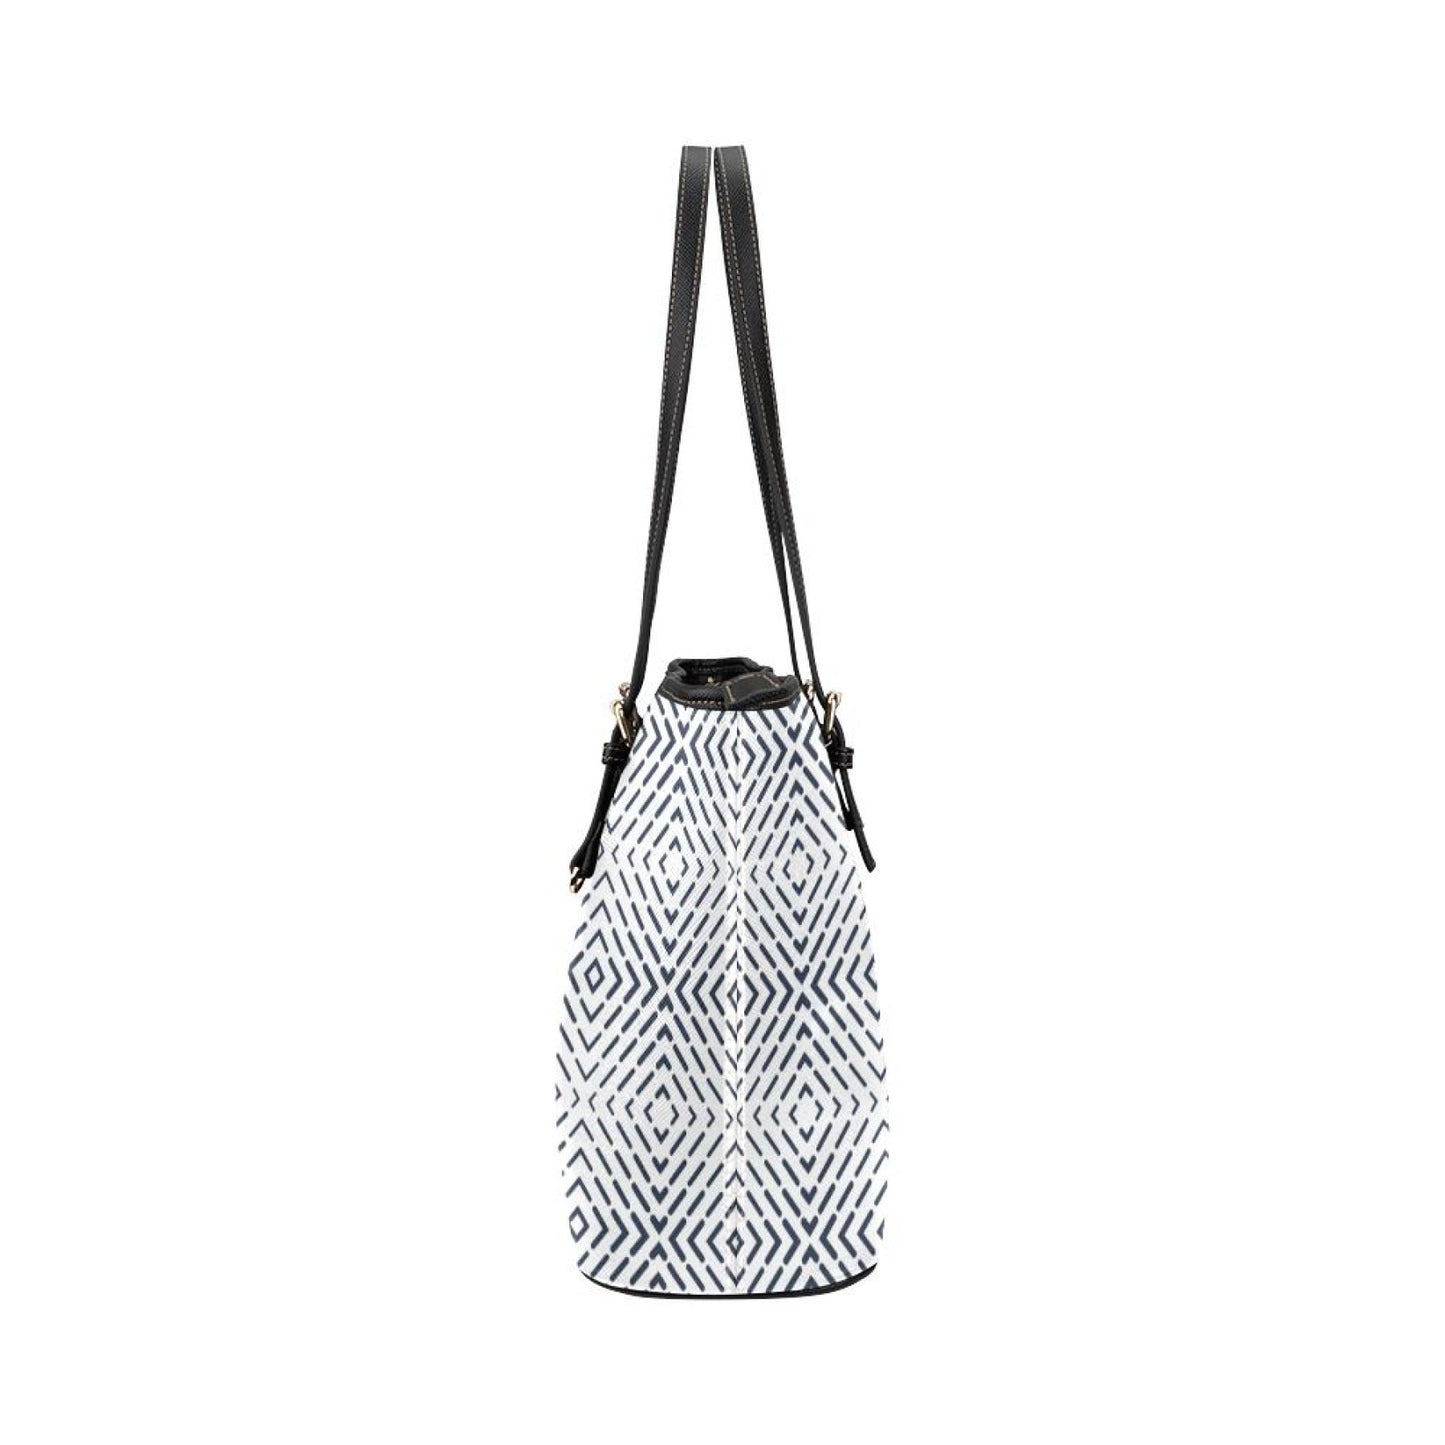 Large Leather Tote Shoulder Bag -  Black And White Gradient Pattern